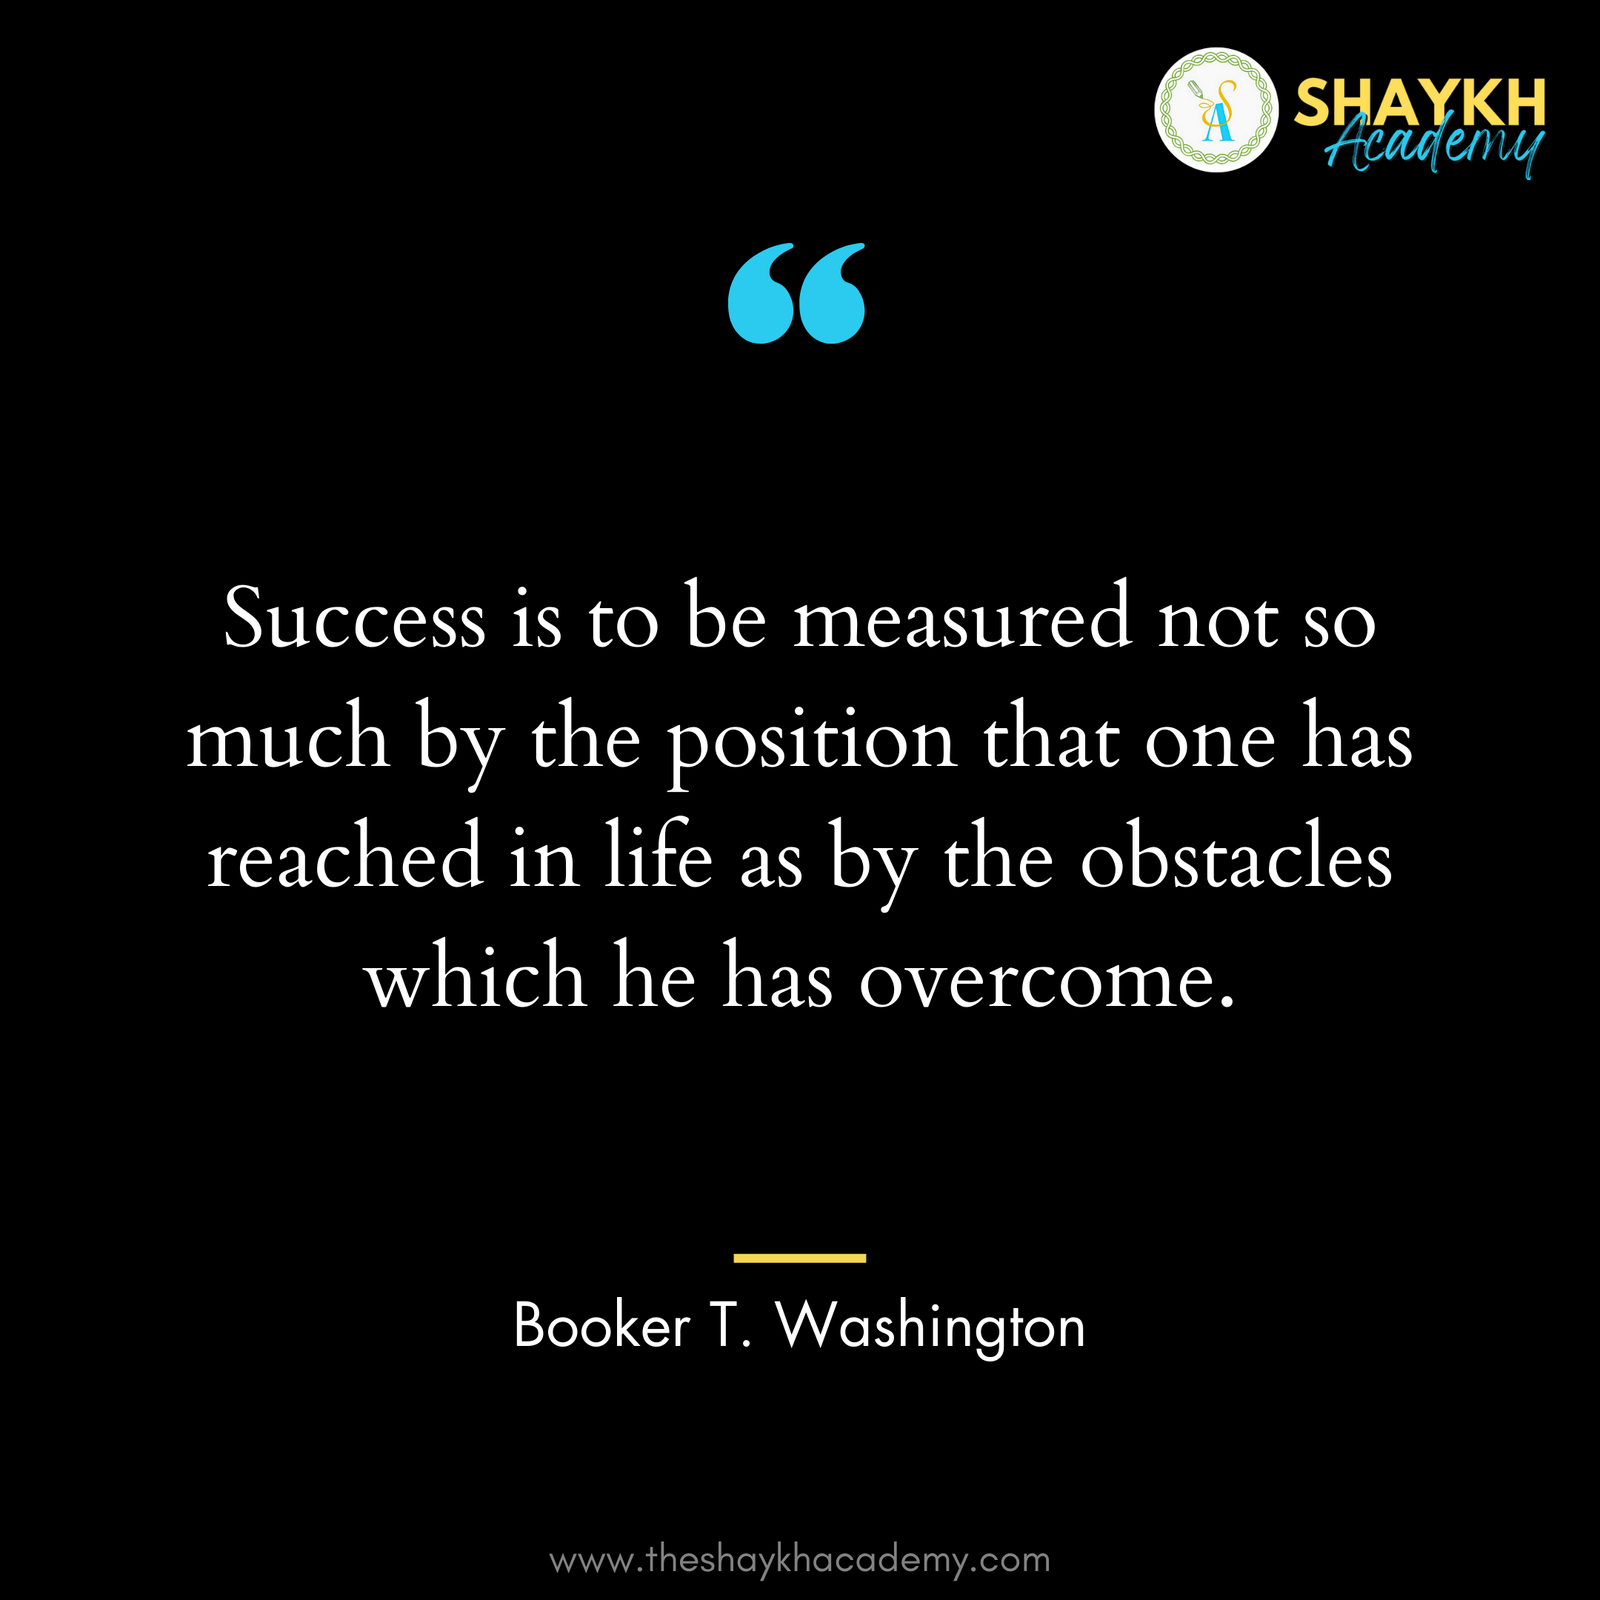 Success is to be measured not so much by the position that one has reached in life as by the obstacles which he has overcome